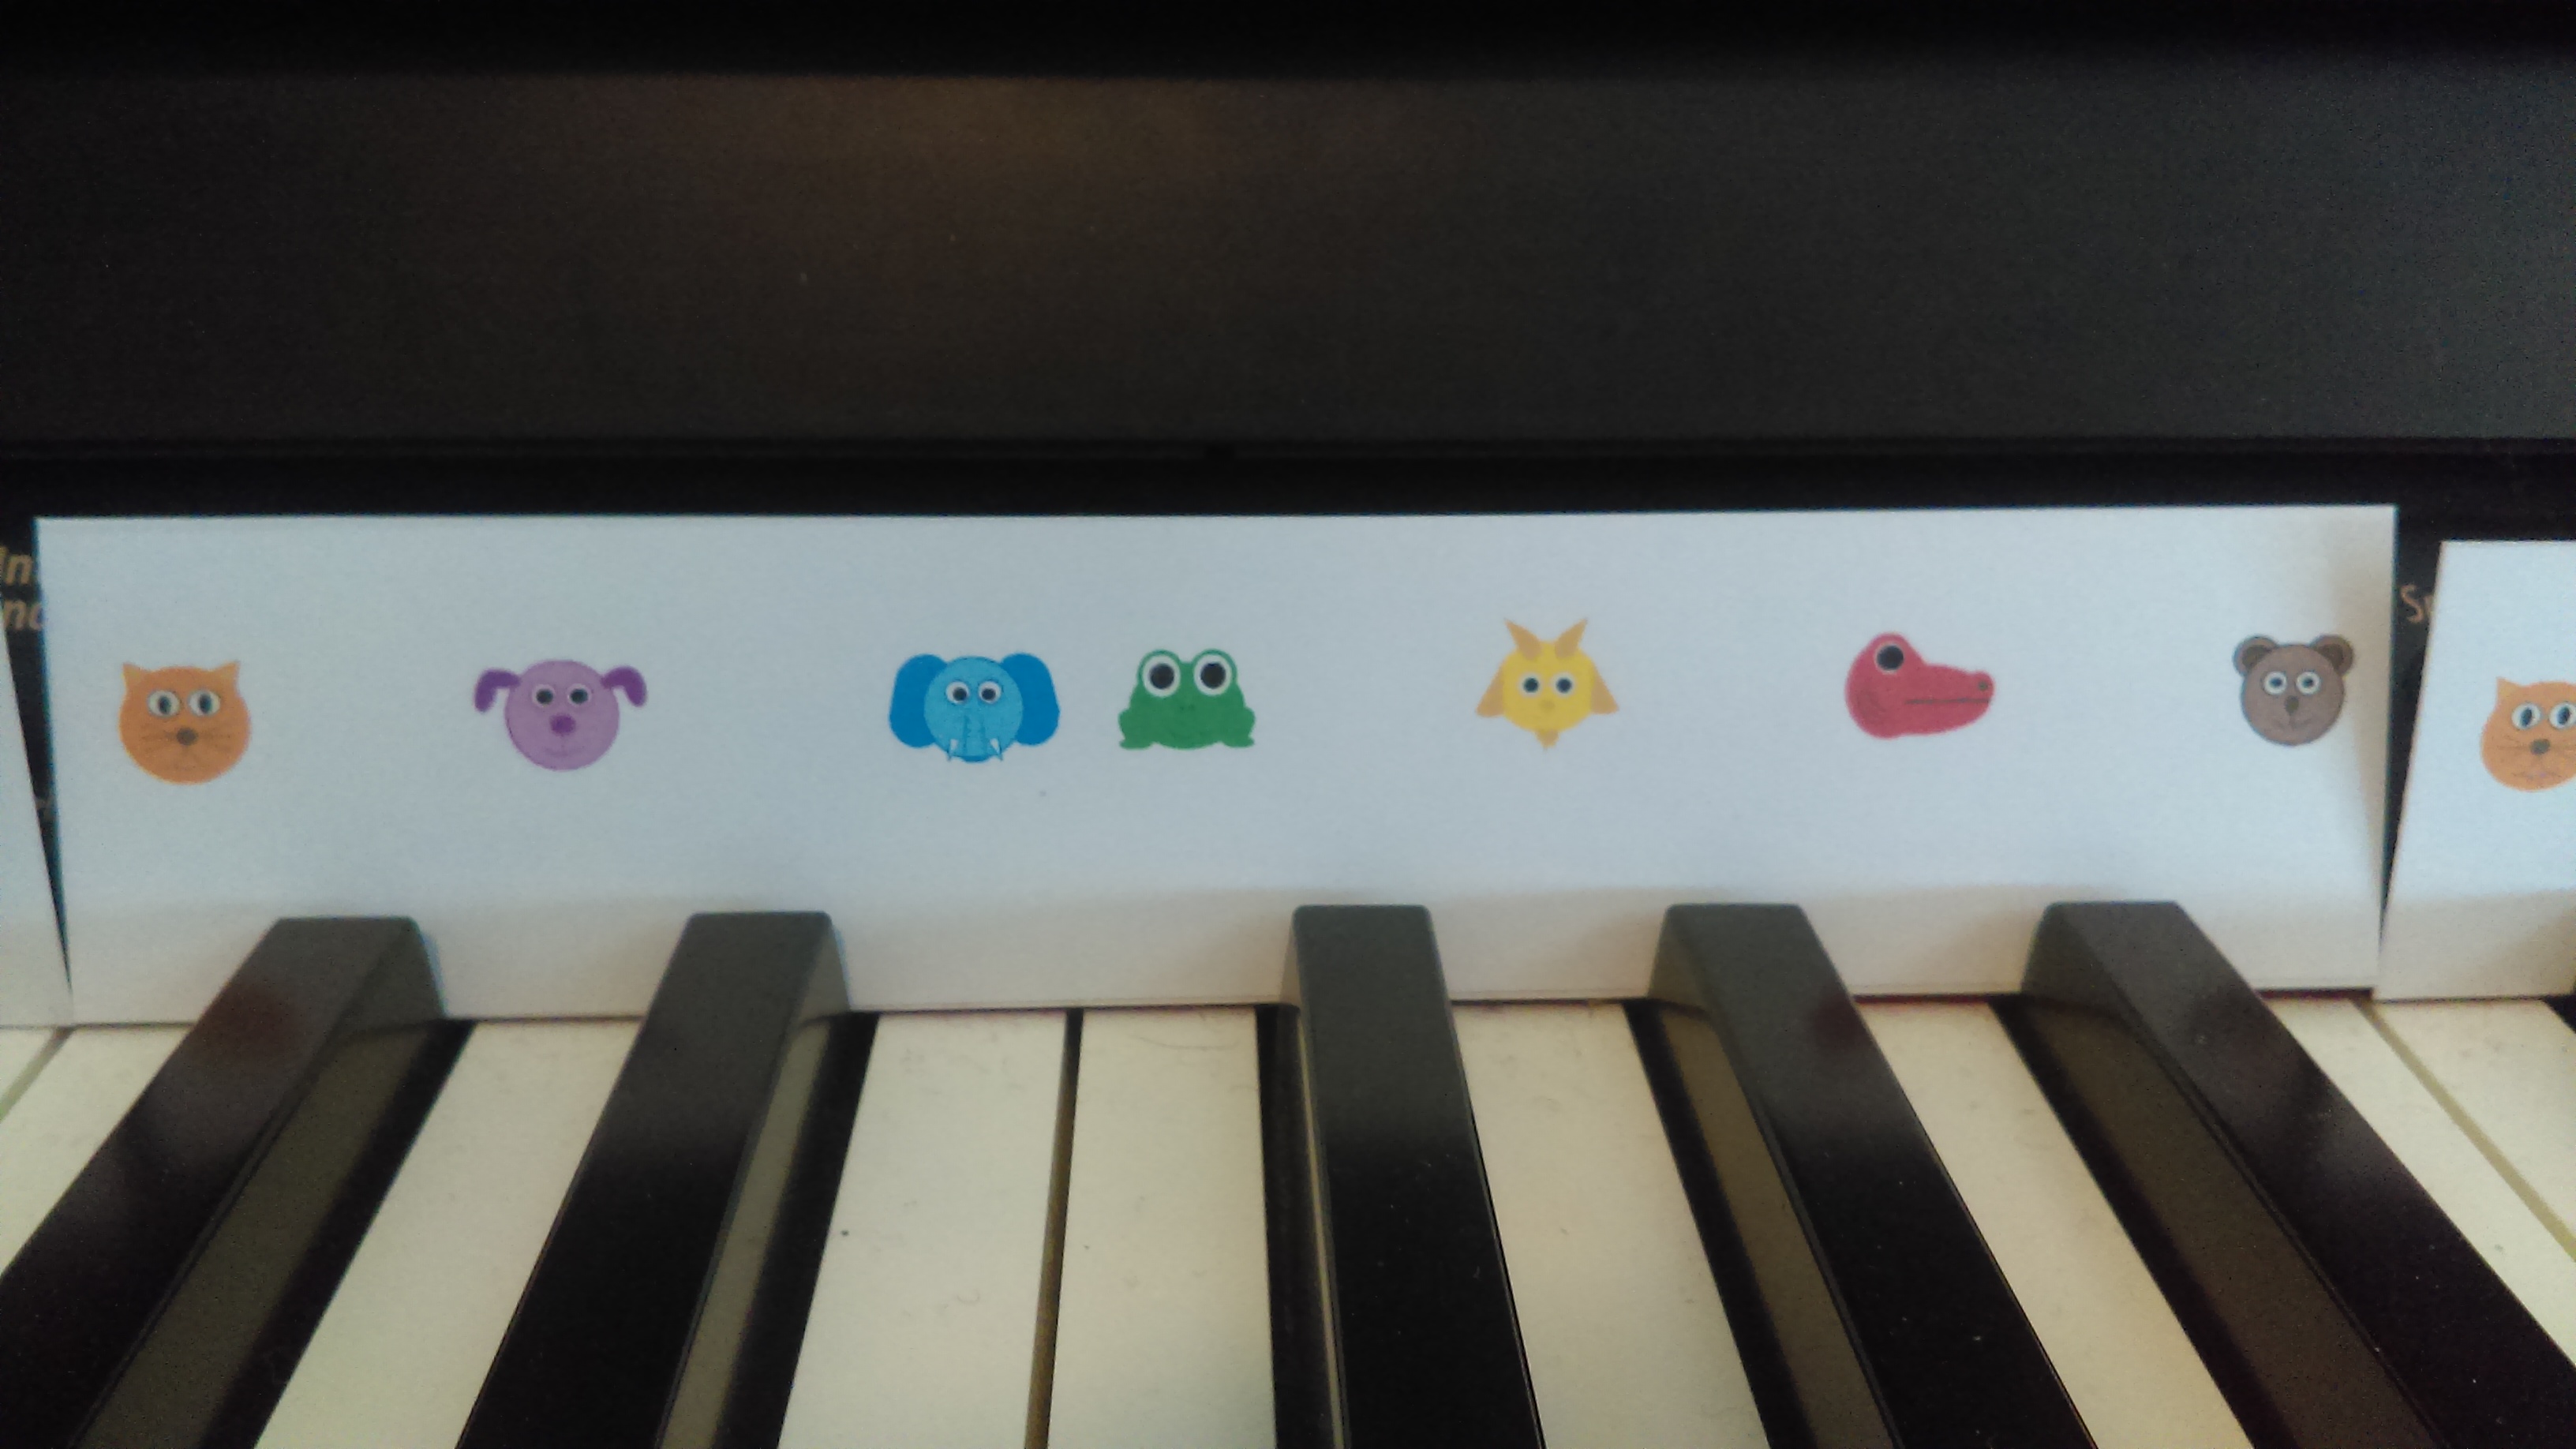 Animal stickers in front of the piano keys